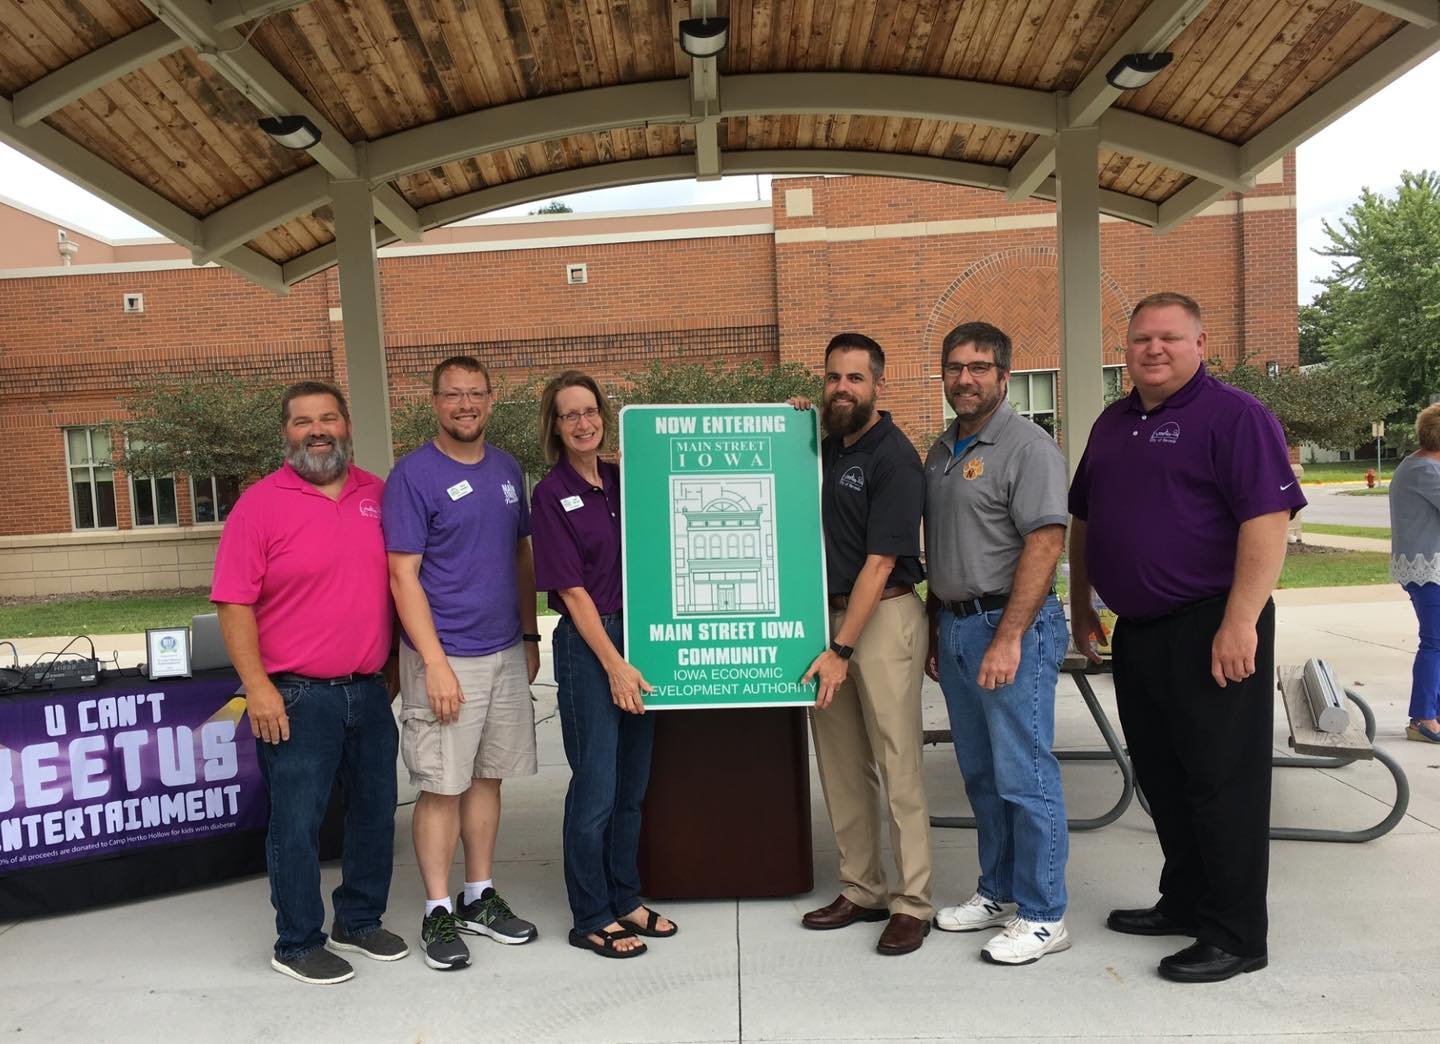 Throwback Thursday: after decades of talk, community leaders came together to put together a successful Main Street application in 2019. Main Street Nevada, IA has achieved more than $2 million in investment in just our first 5 years!